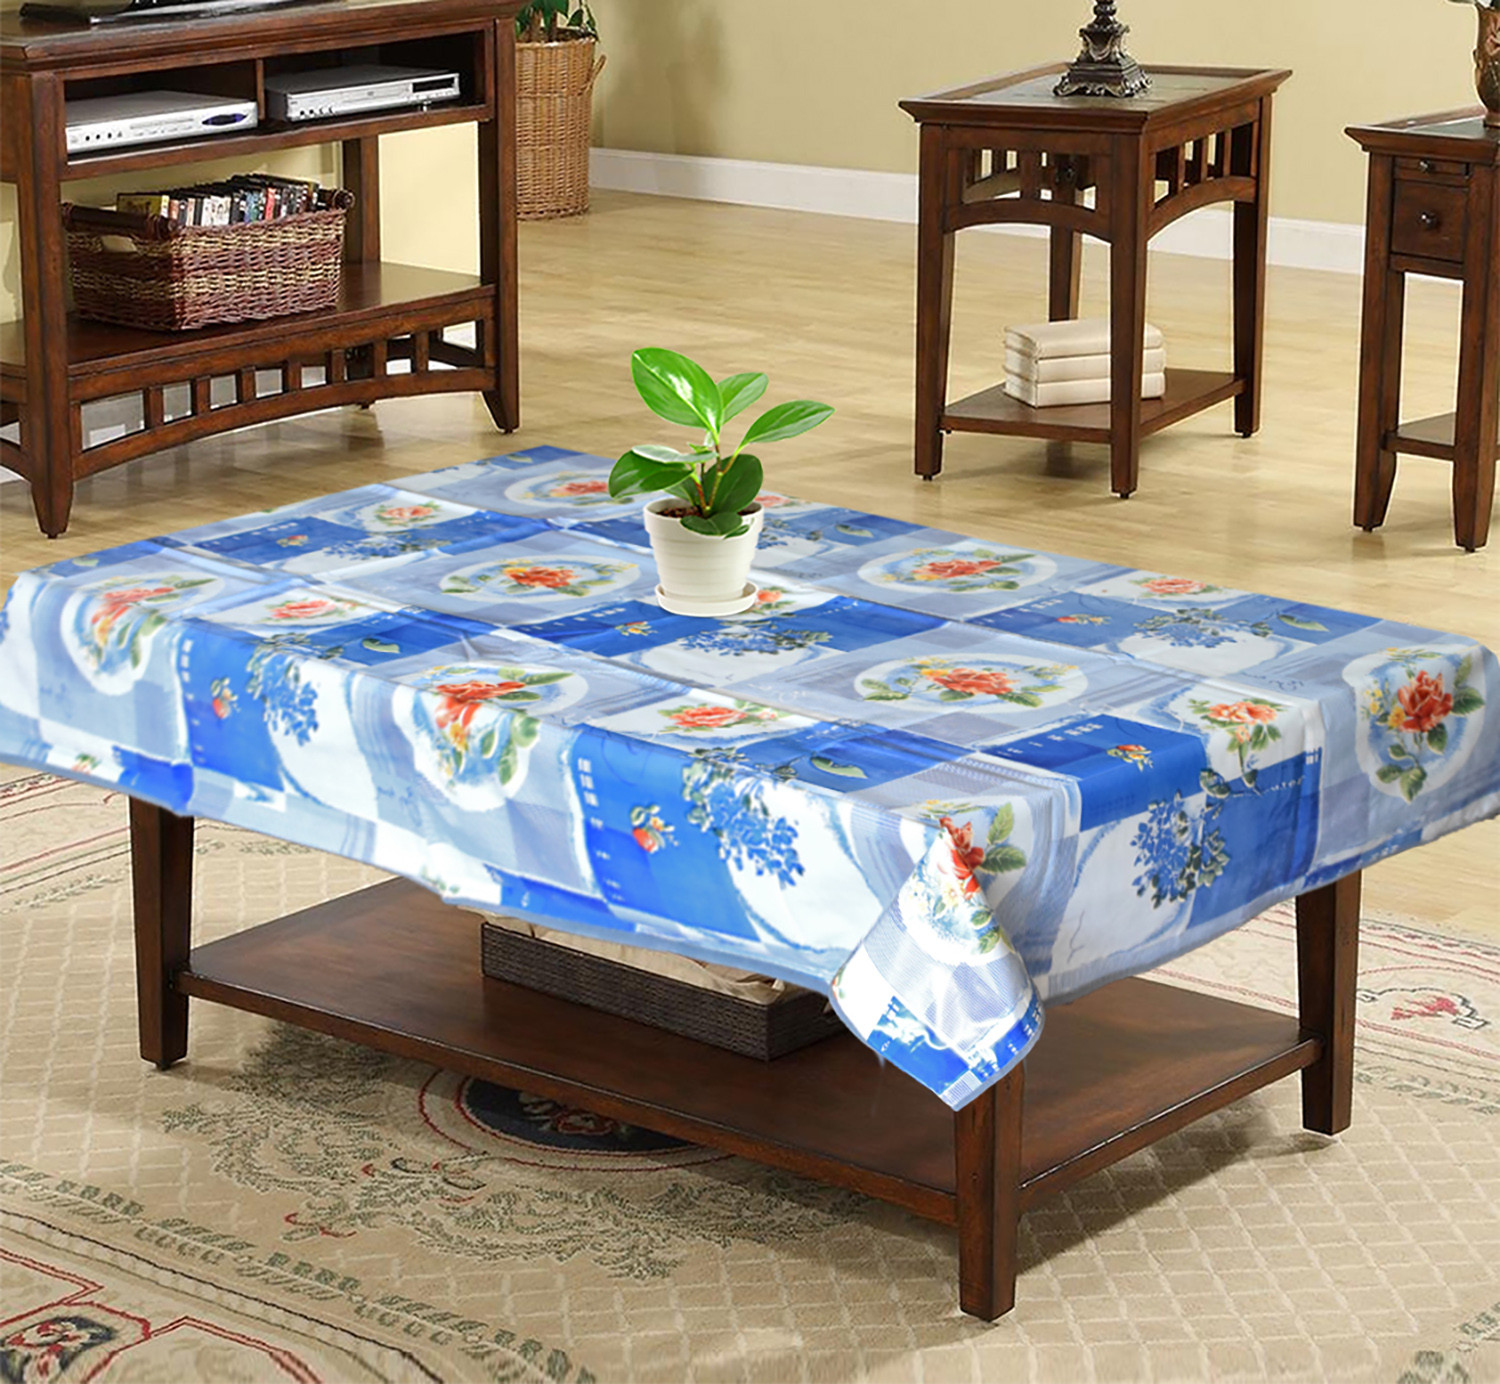 Kuber Industries Floral Print PVC Center Table Cover/Table Cloth For Home Decorative Luxurious 4 Seater, 60